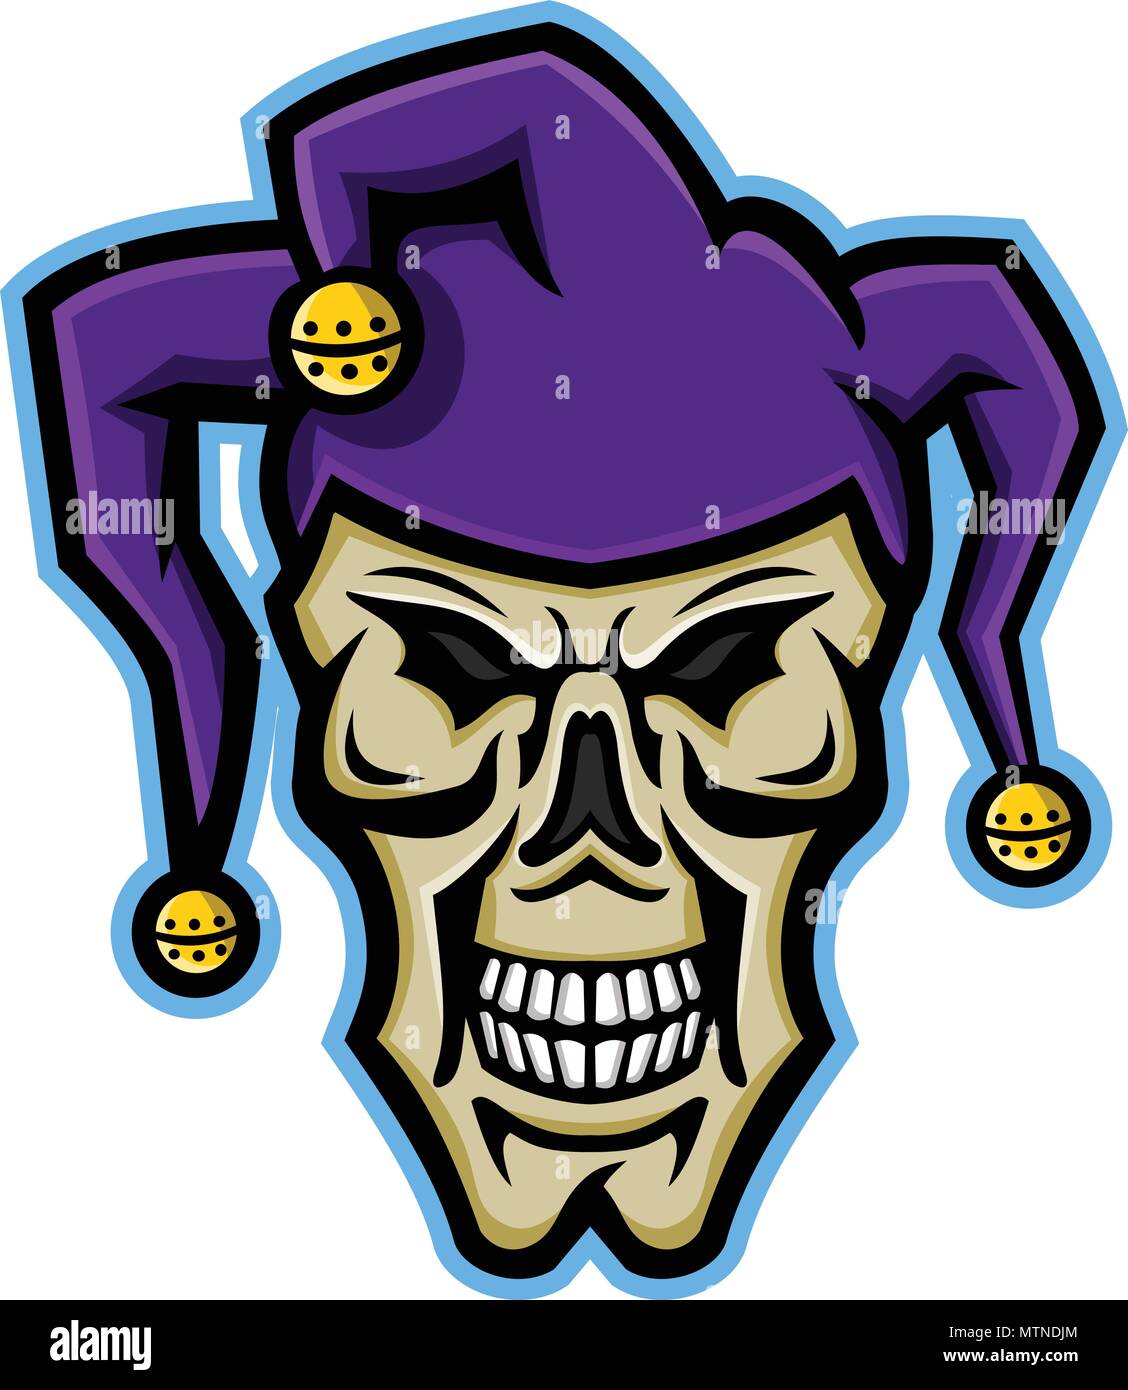 Mascot icon illustration of head of a court jester, joker, fool,story-teller or minstrel skull viewed from front on isolated background in retro style Stock Vector